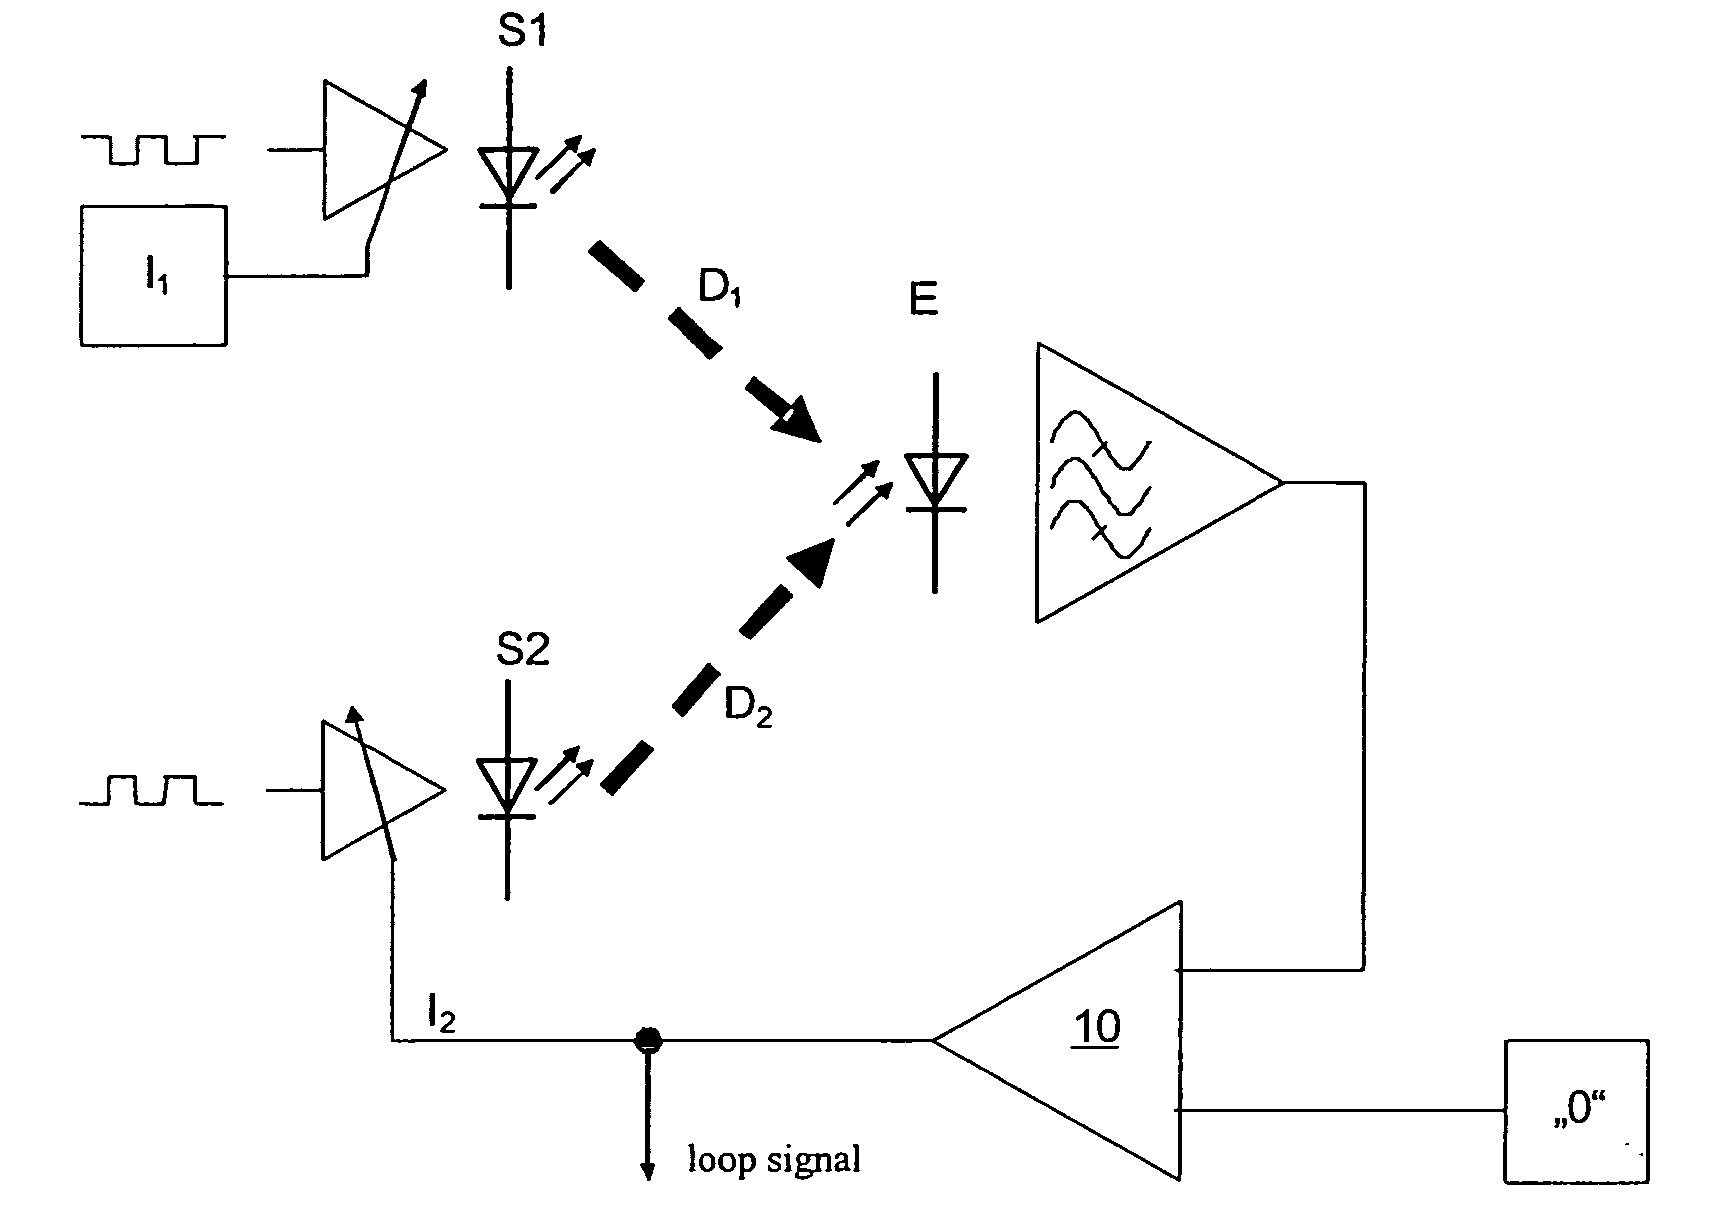 Method Of Determining And/Or Evaluating A Differential Optical Signal